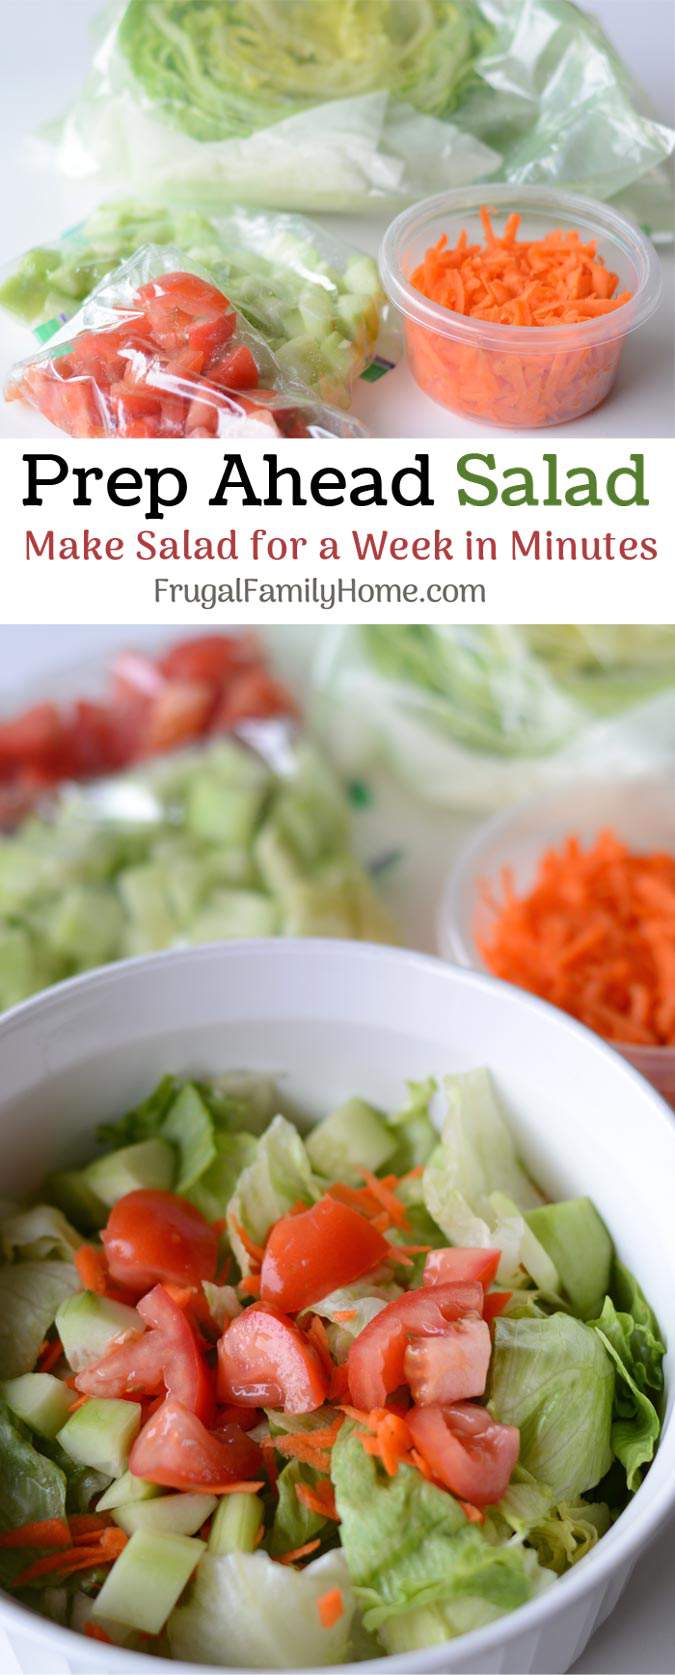 How To Prep Ahead Salad For The Whole Week